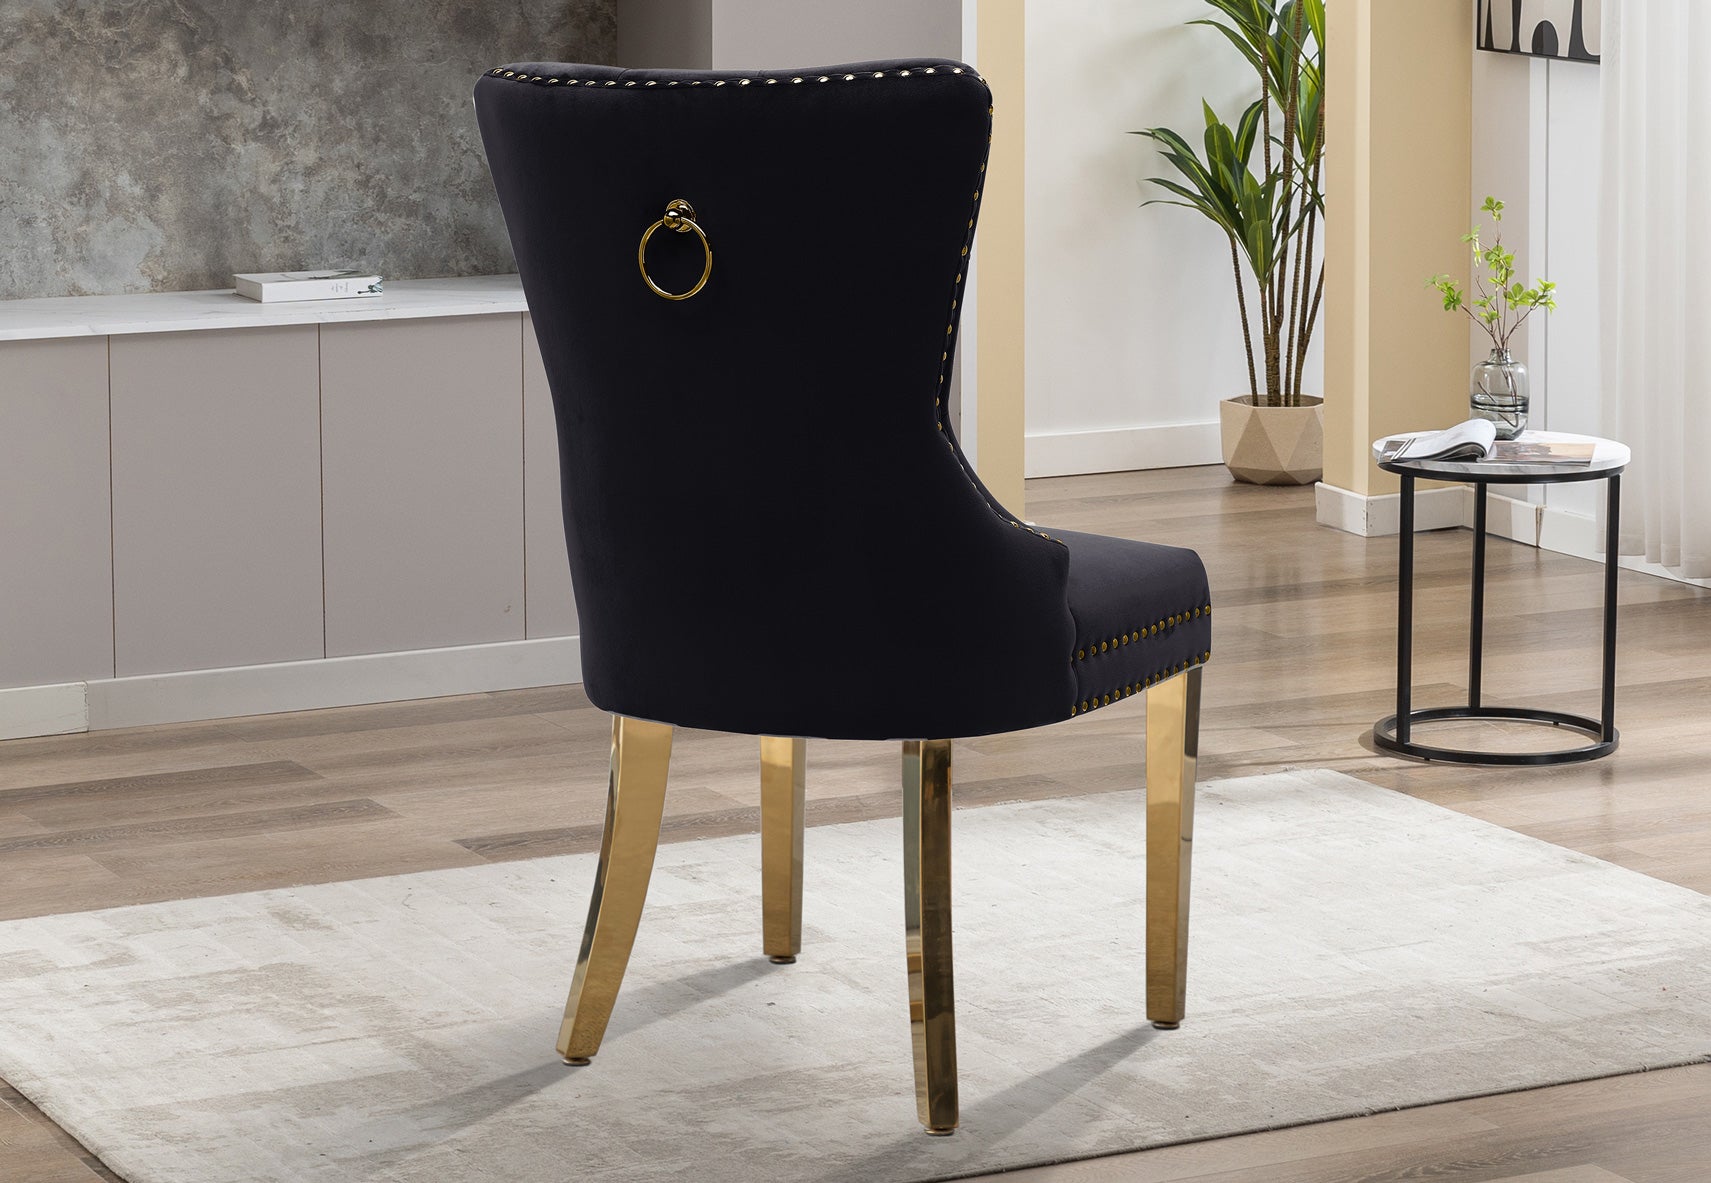 OPAL GOLD CHAIR – AjsFurniture